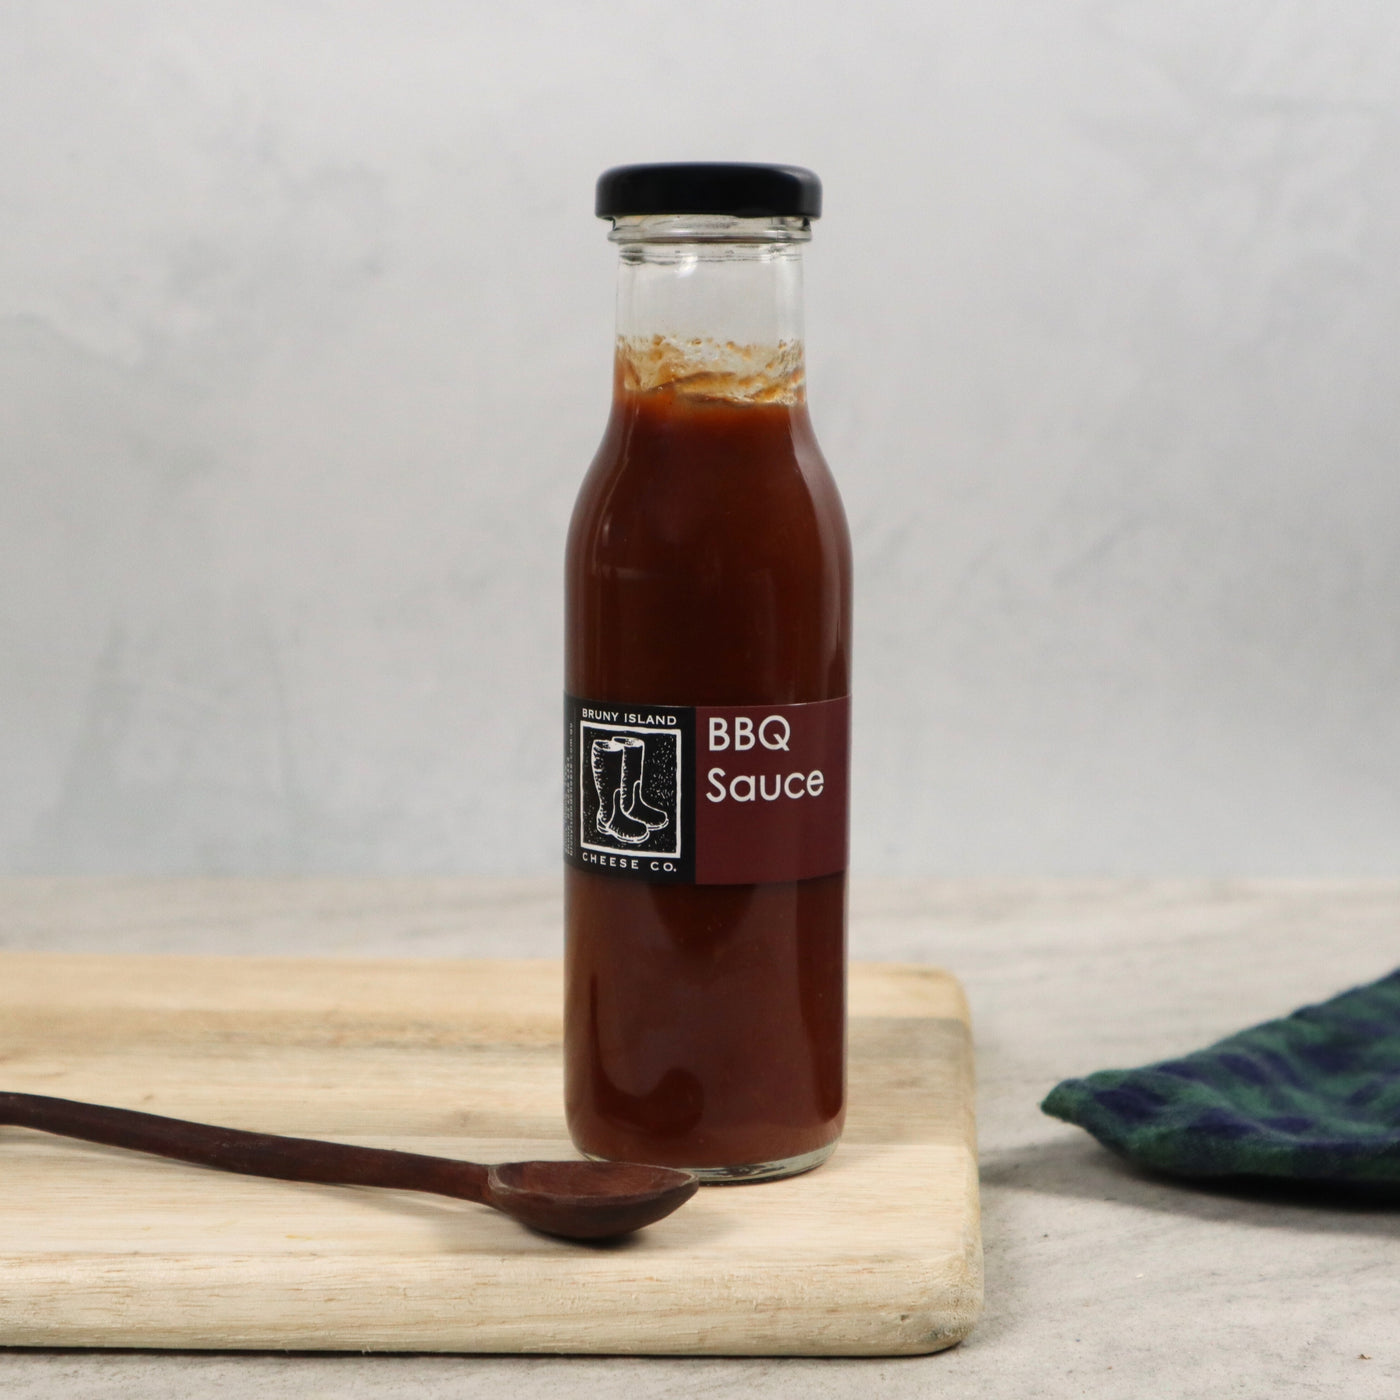 Our BBQ Sauce